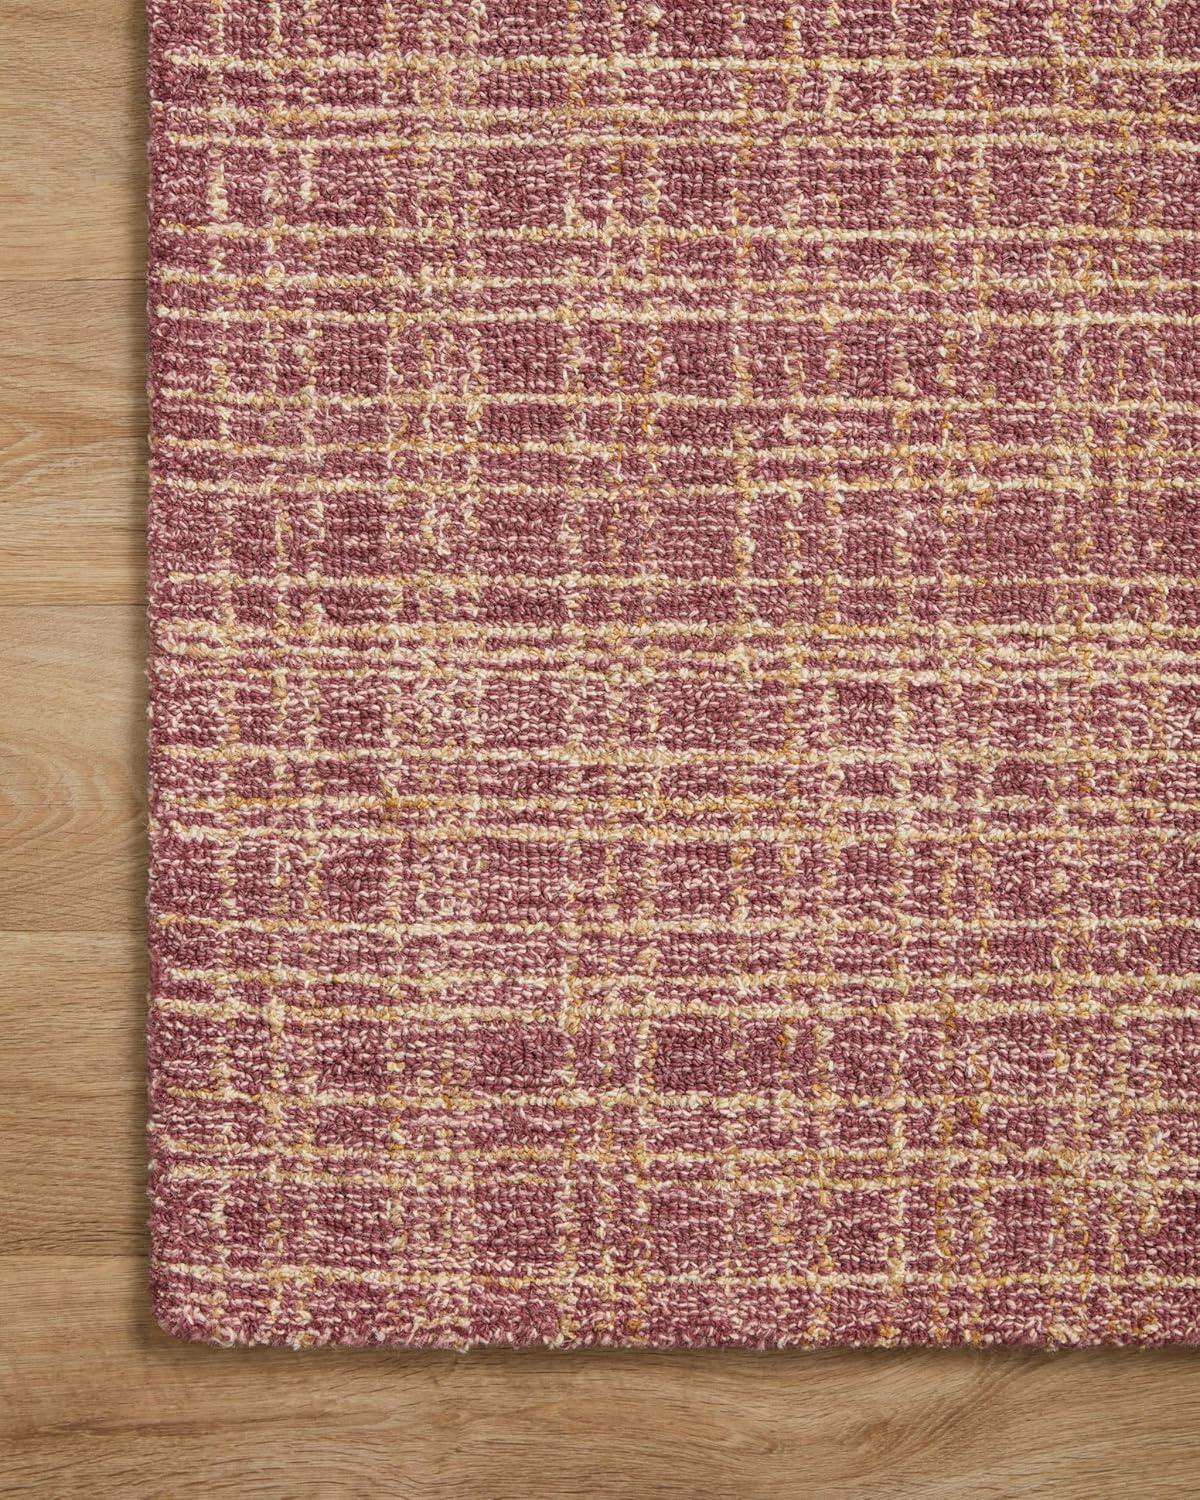 Berry & Natural Hand-Tufted Wool Runner Rug 2'6" x 9'9"